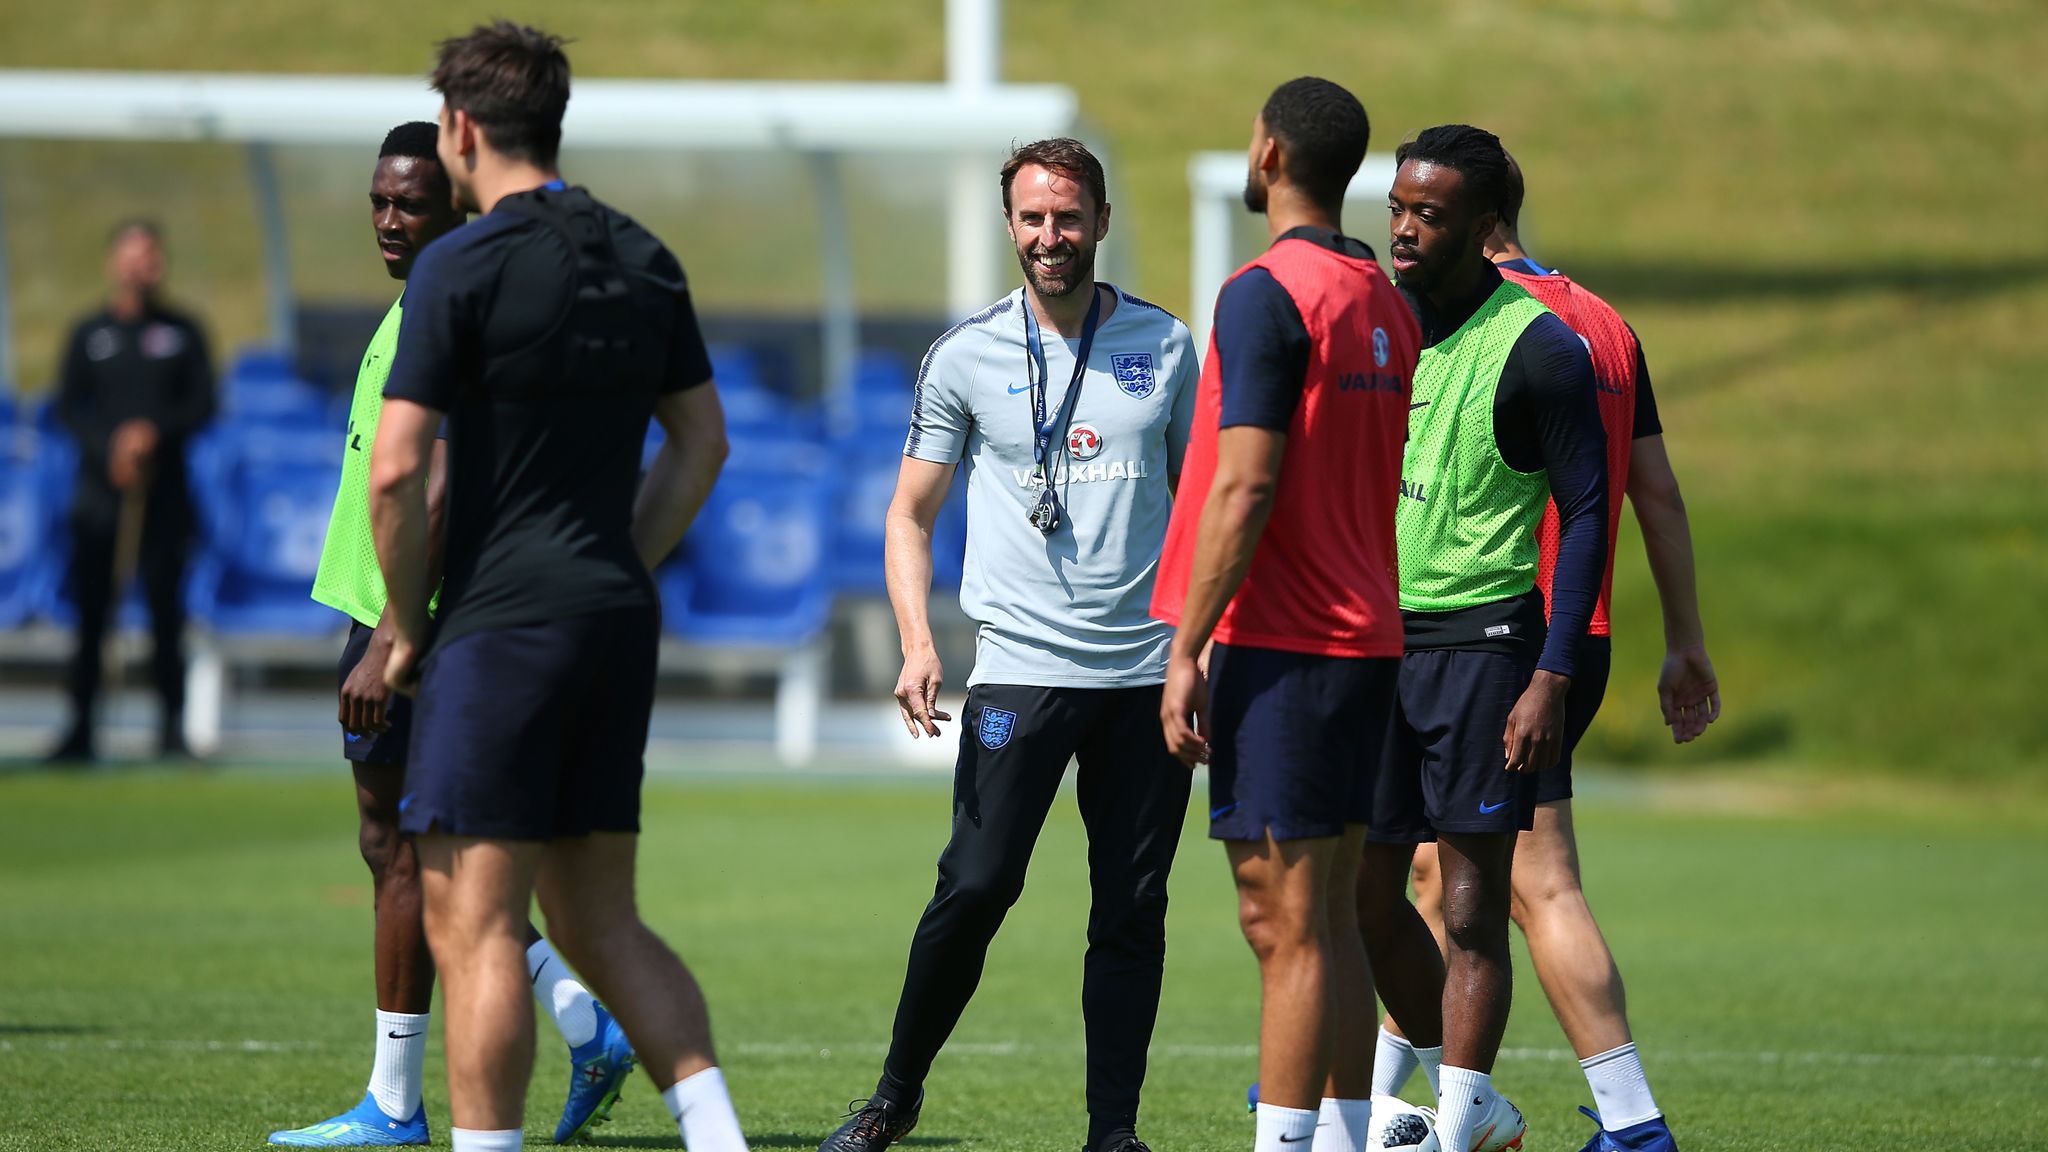 Inside England S World Cup Camp At St George S Park Football News Sky Sports